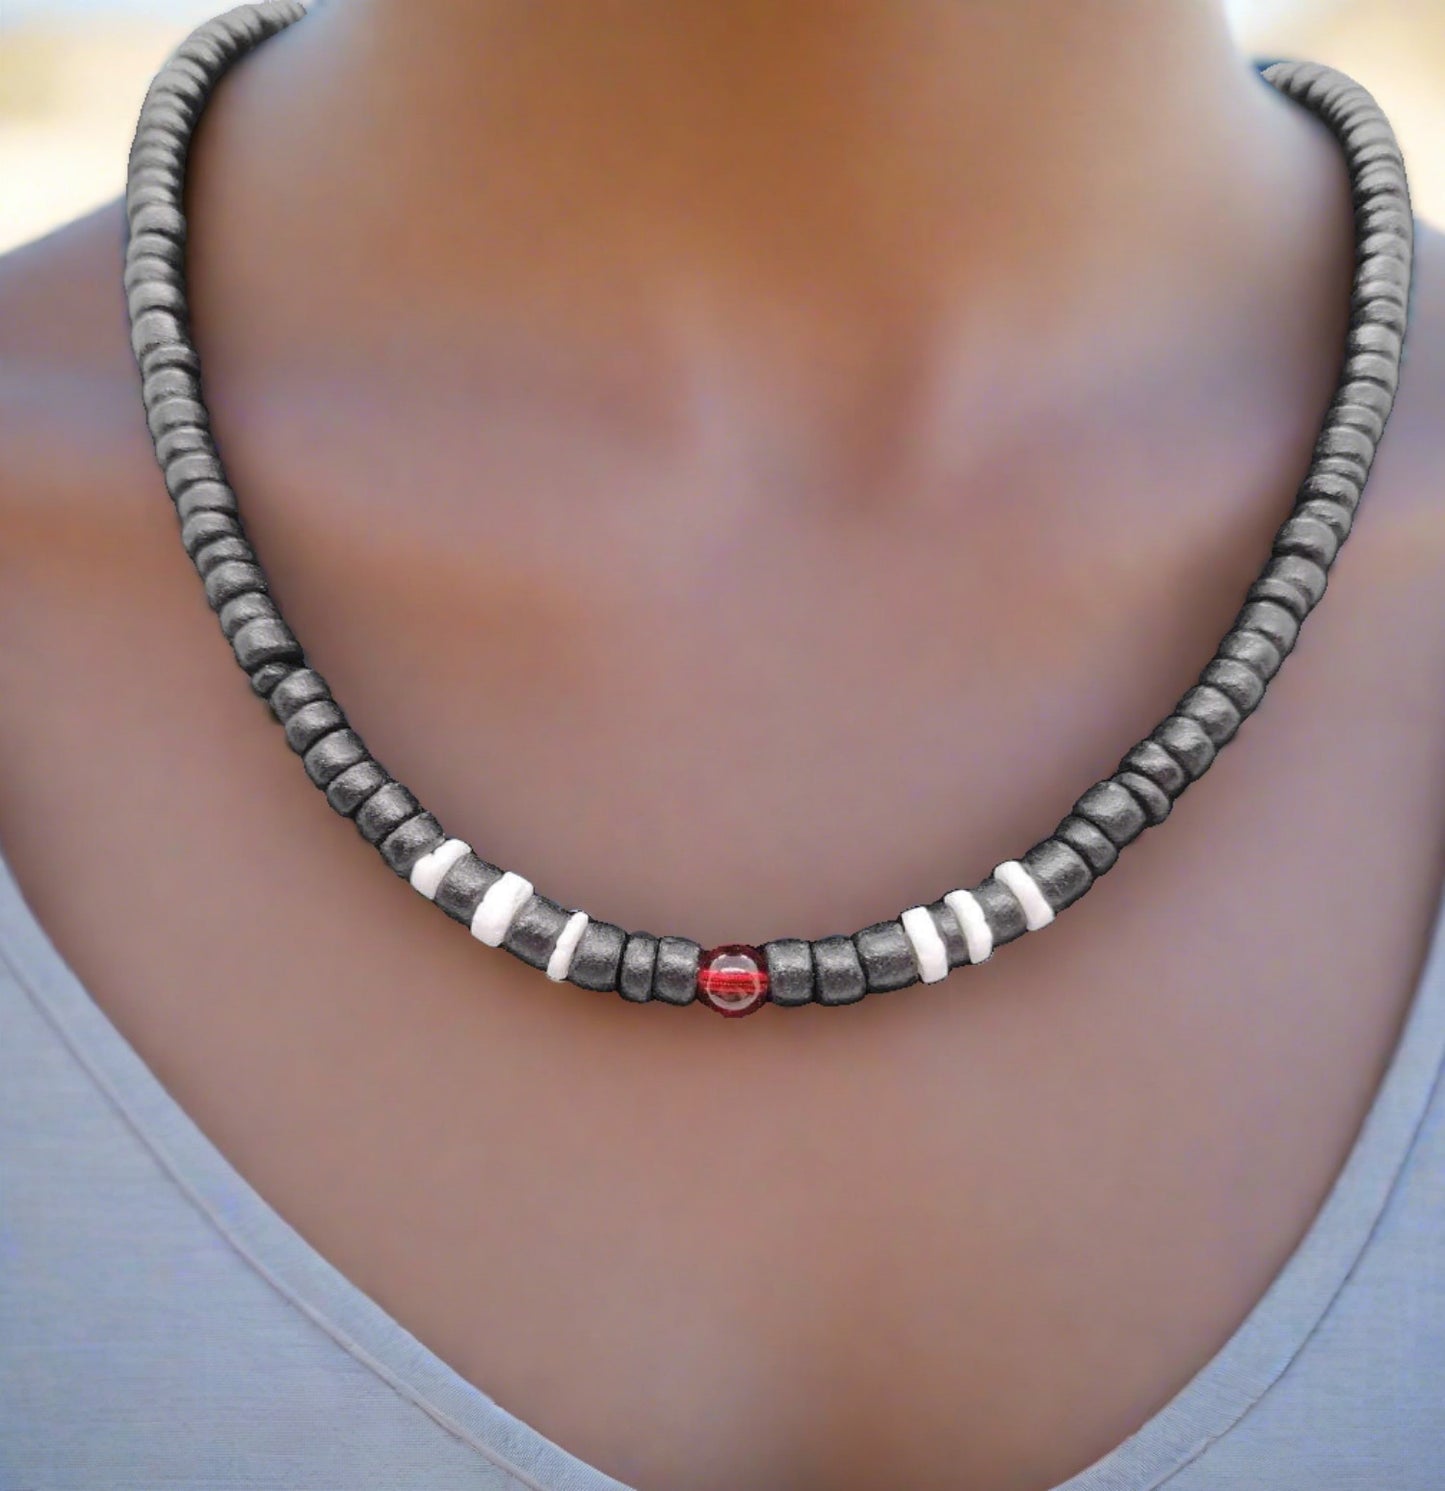 Our black wooden beaded necklace with white wooden beads and a red glass bead as accents.